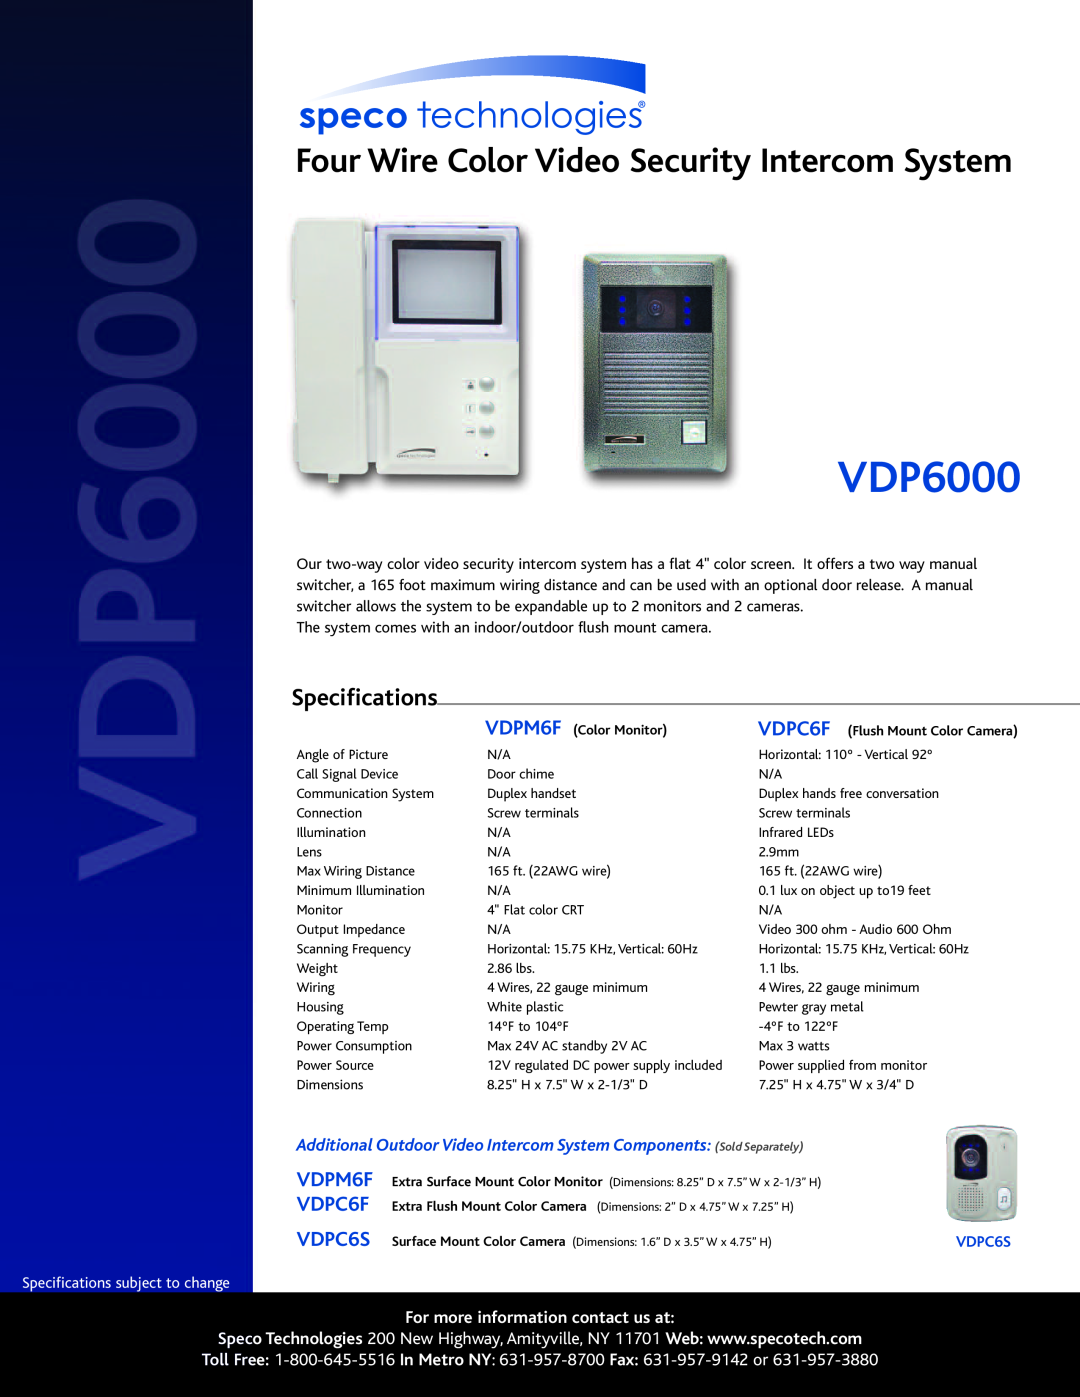 Speco Technologies VDP6000 specifications FourWire Color Video Security Intercom System, Specifications 